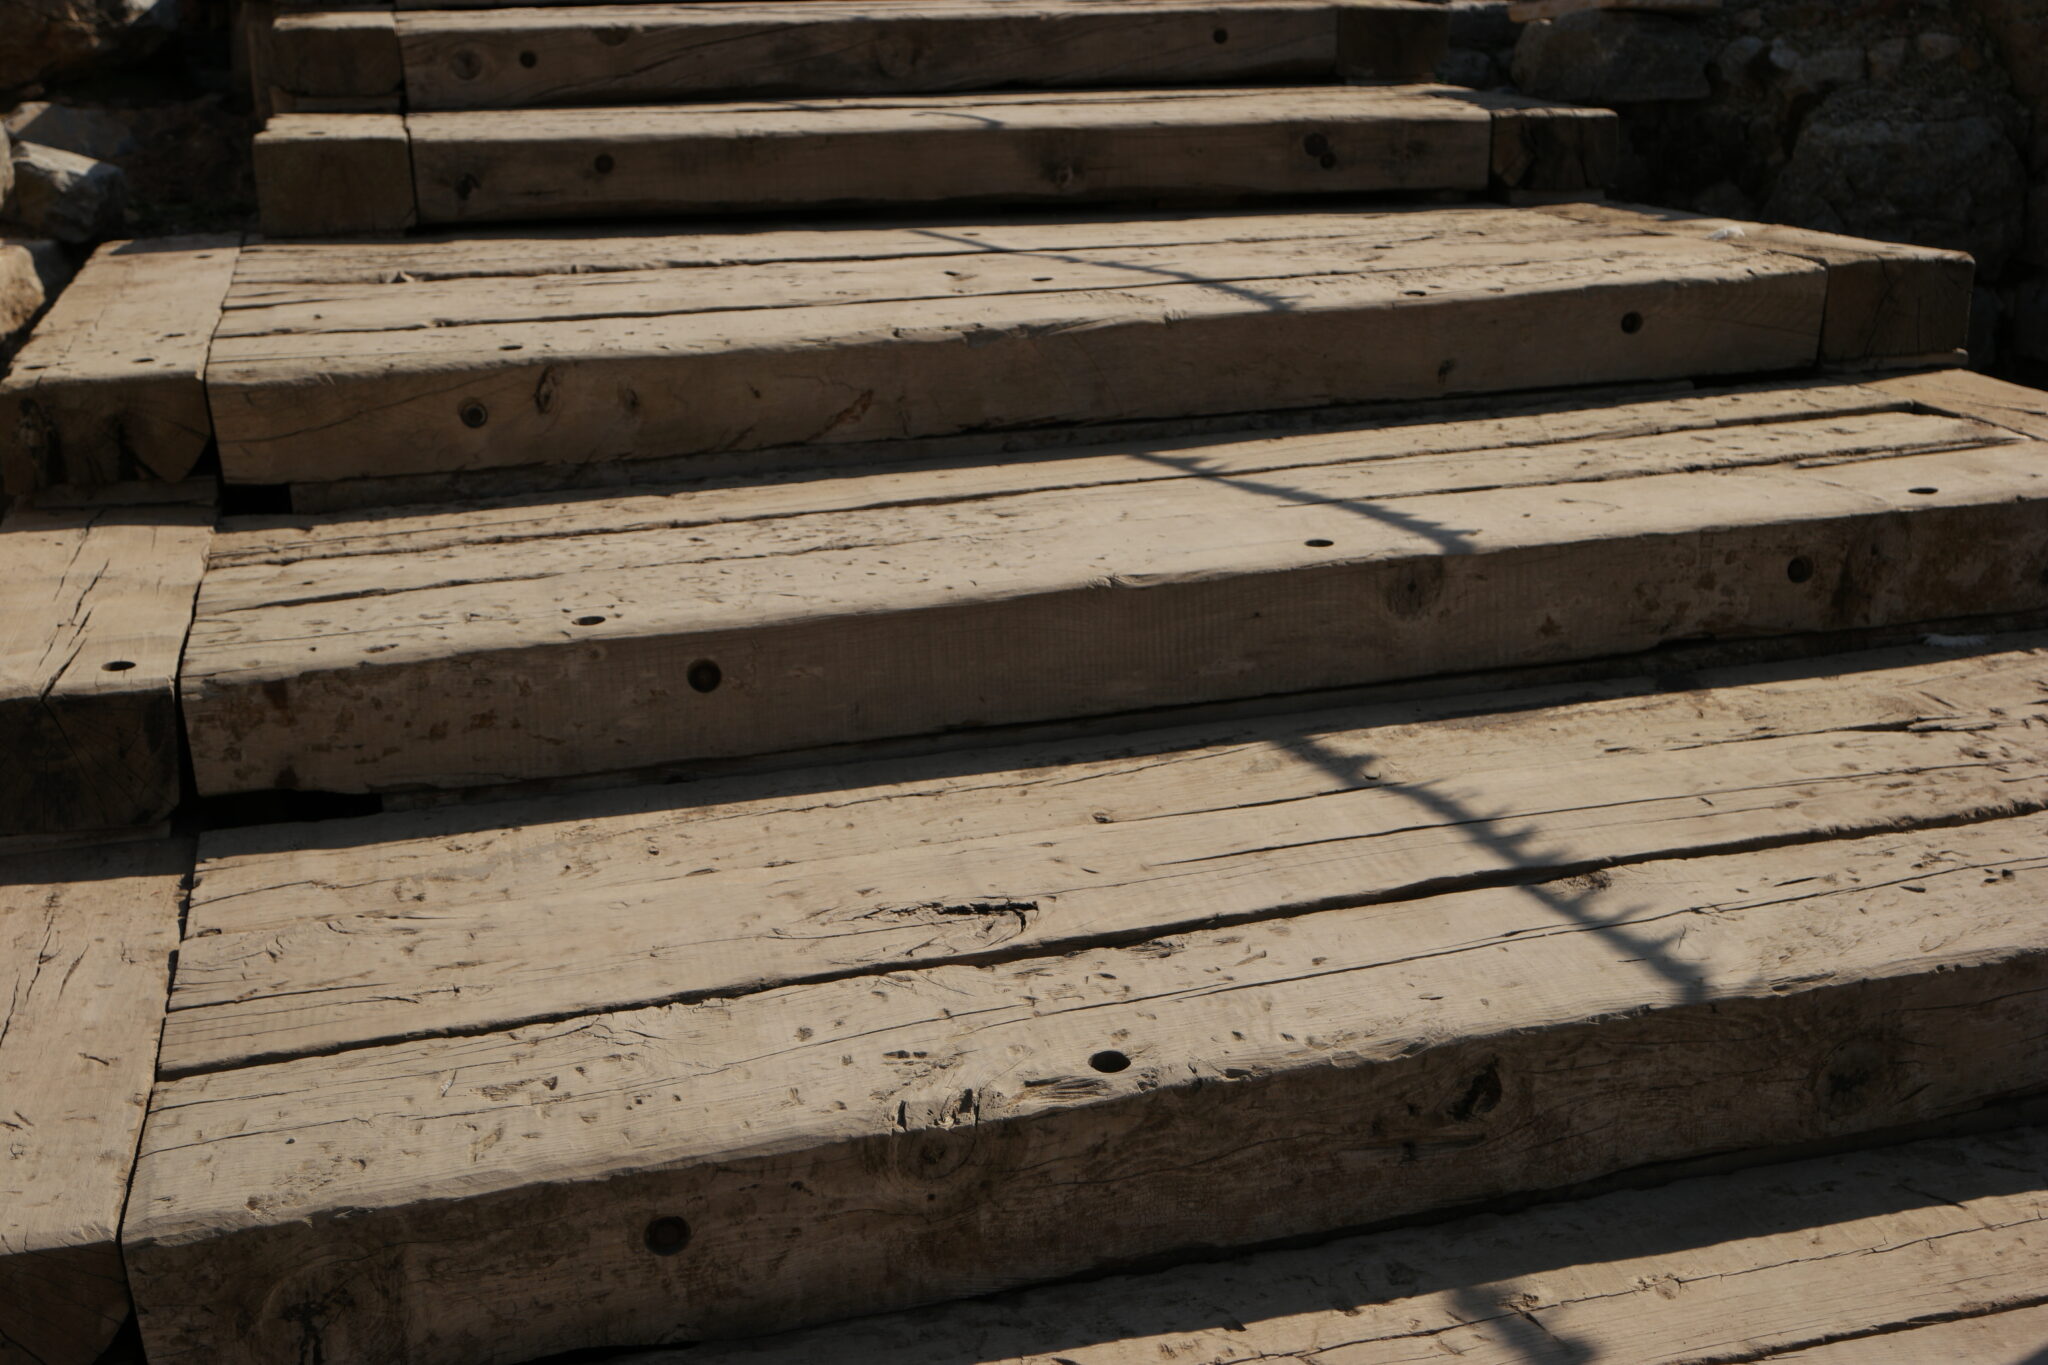 close-up-view-of-wooden-stairs-or-steps-outdoors-2022-01-28-10-03-13-utc-2048x1365